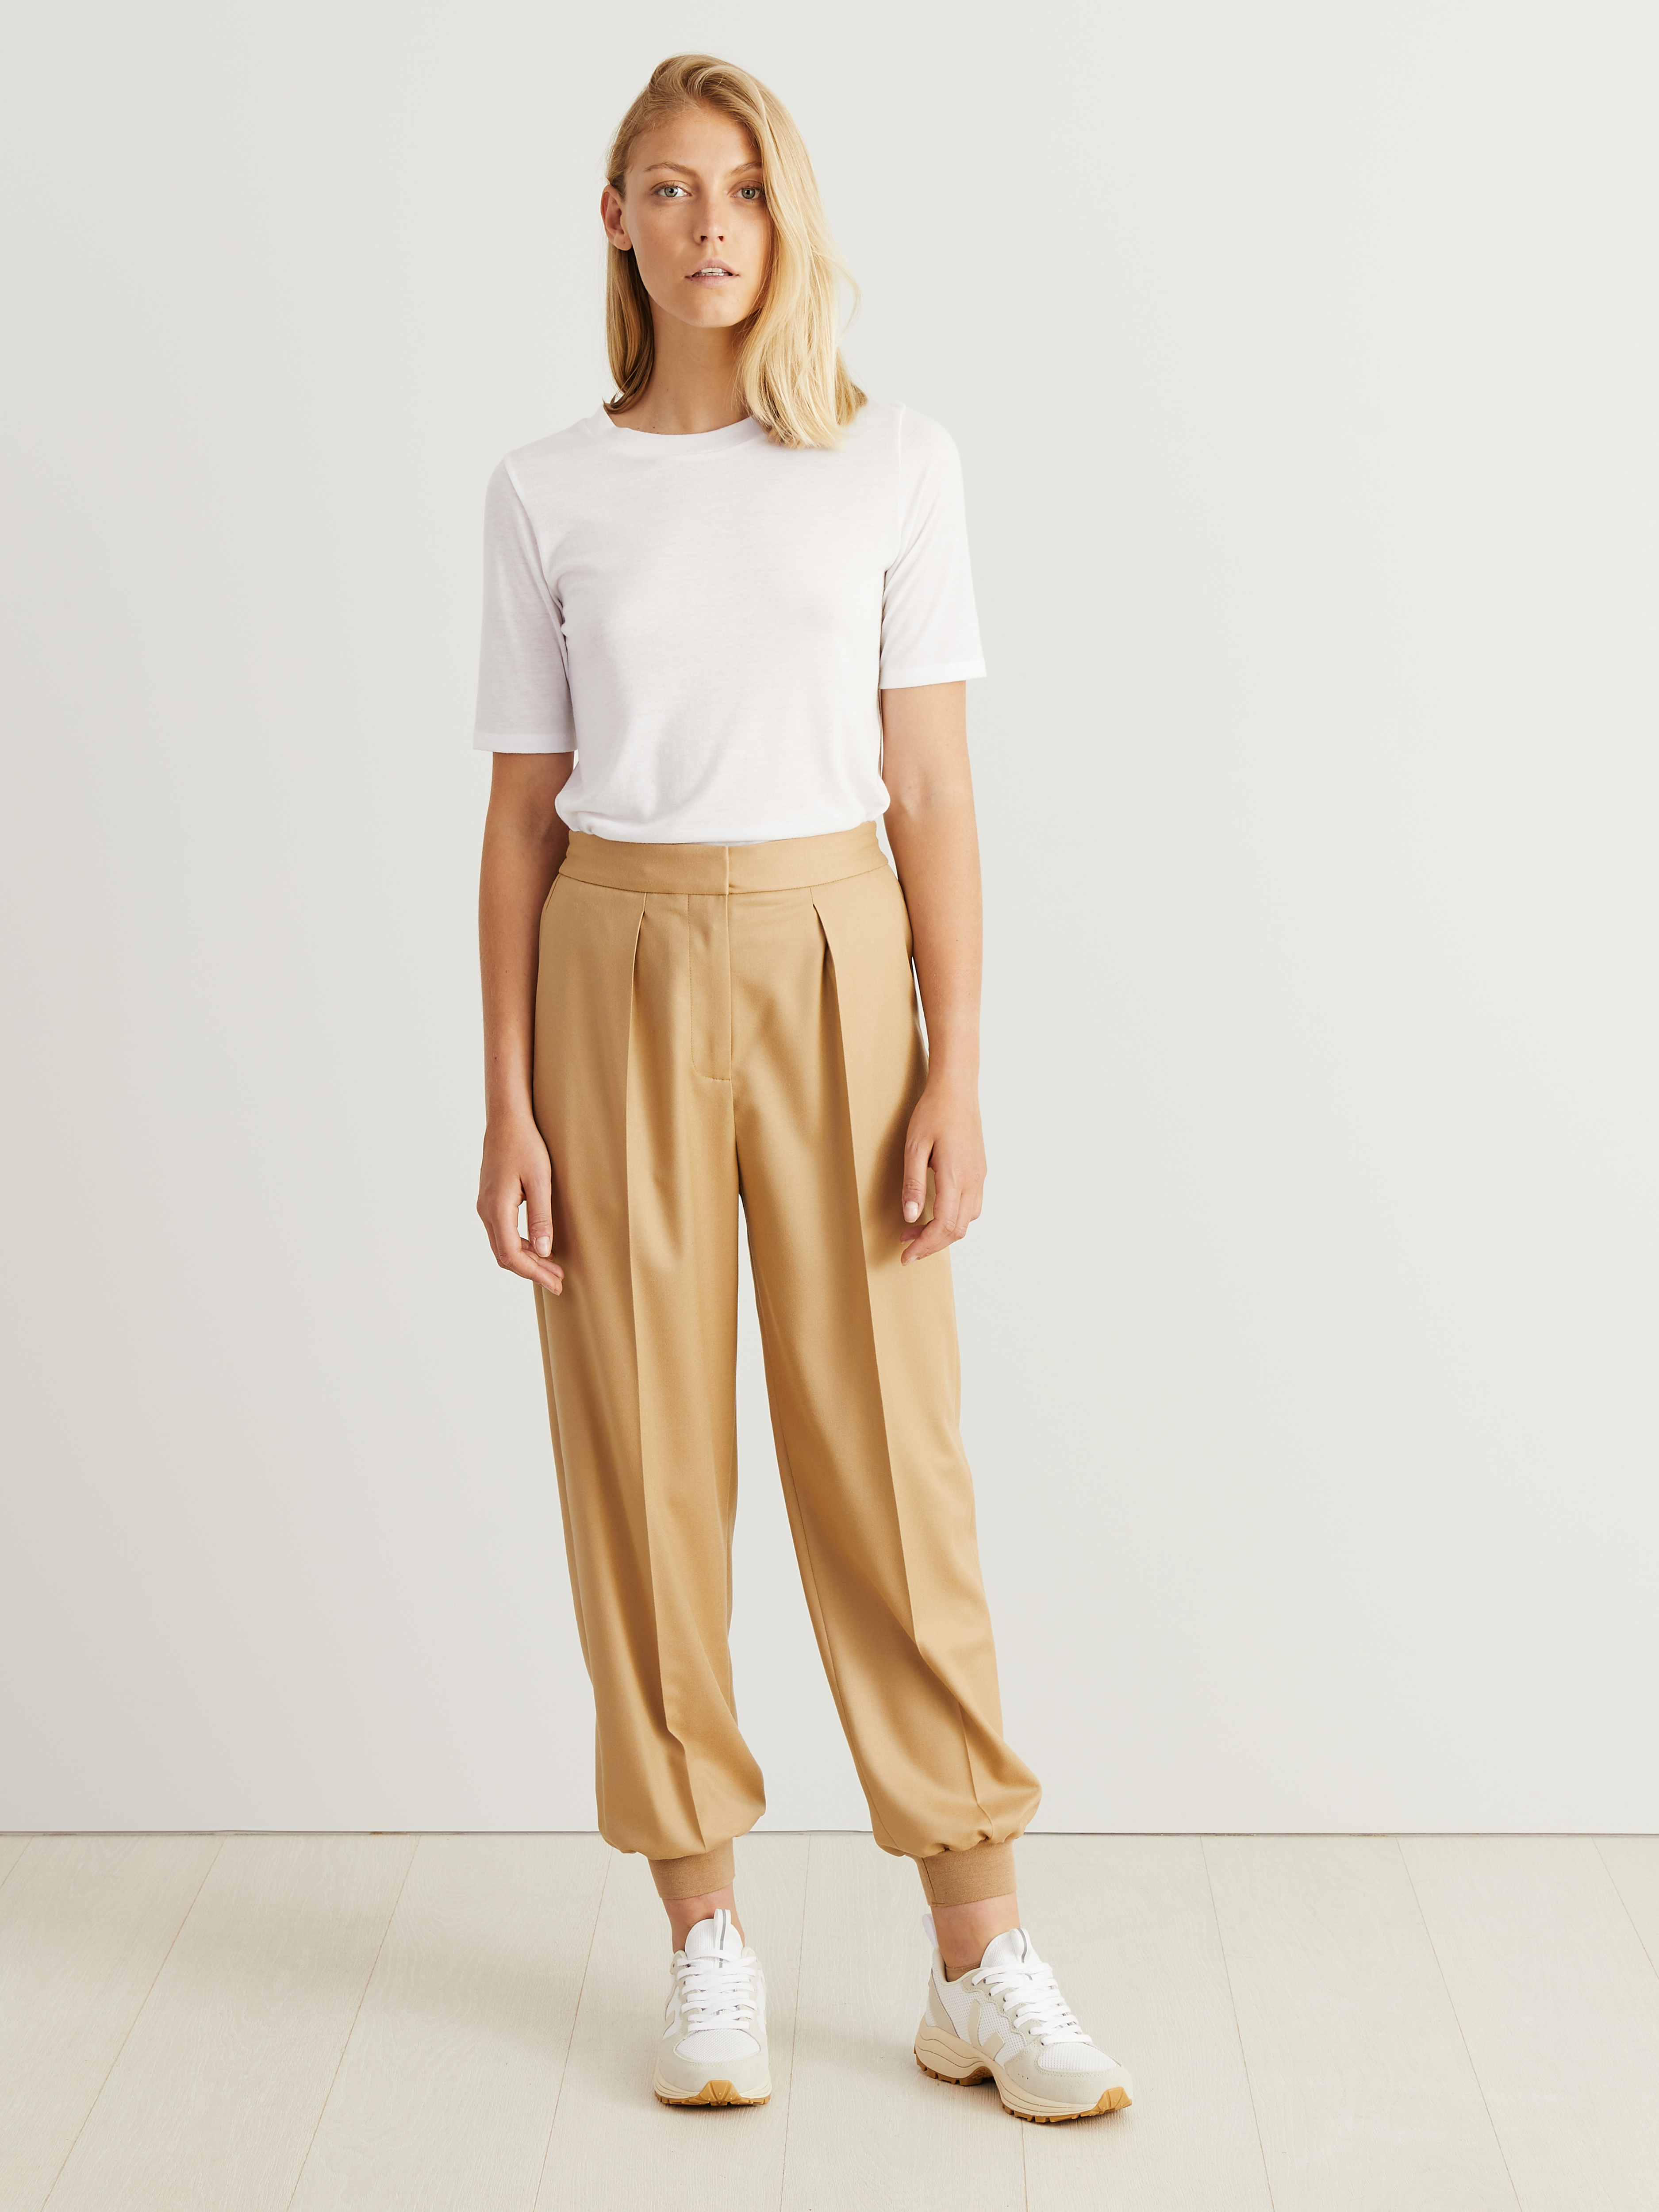 McCartney Trousers 'Nicole' with Waistband Detail Beige | Pants